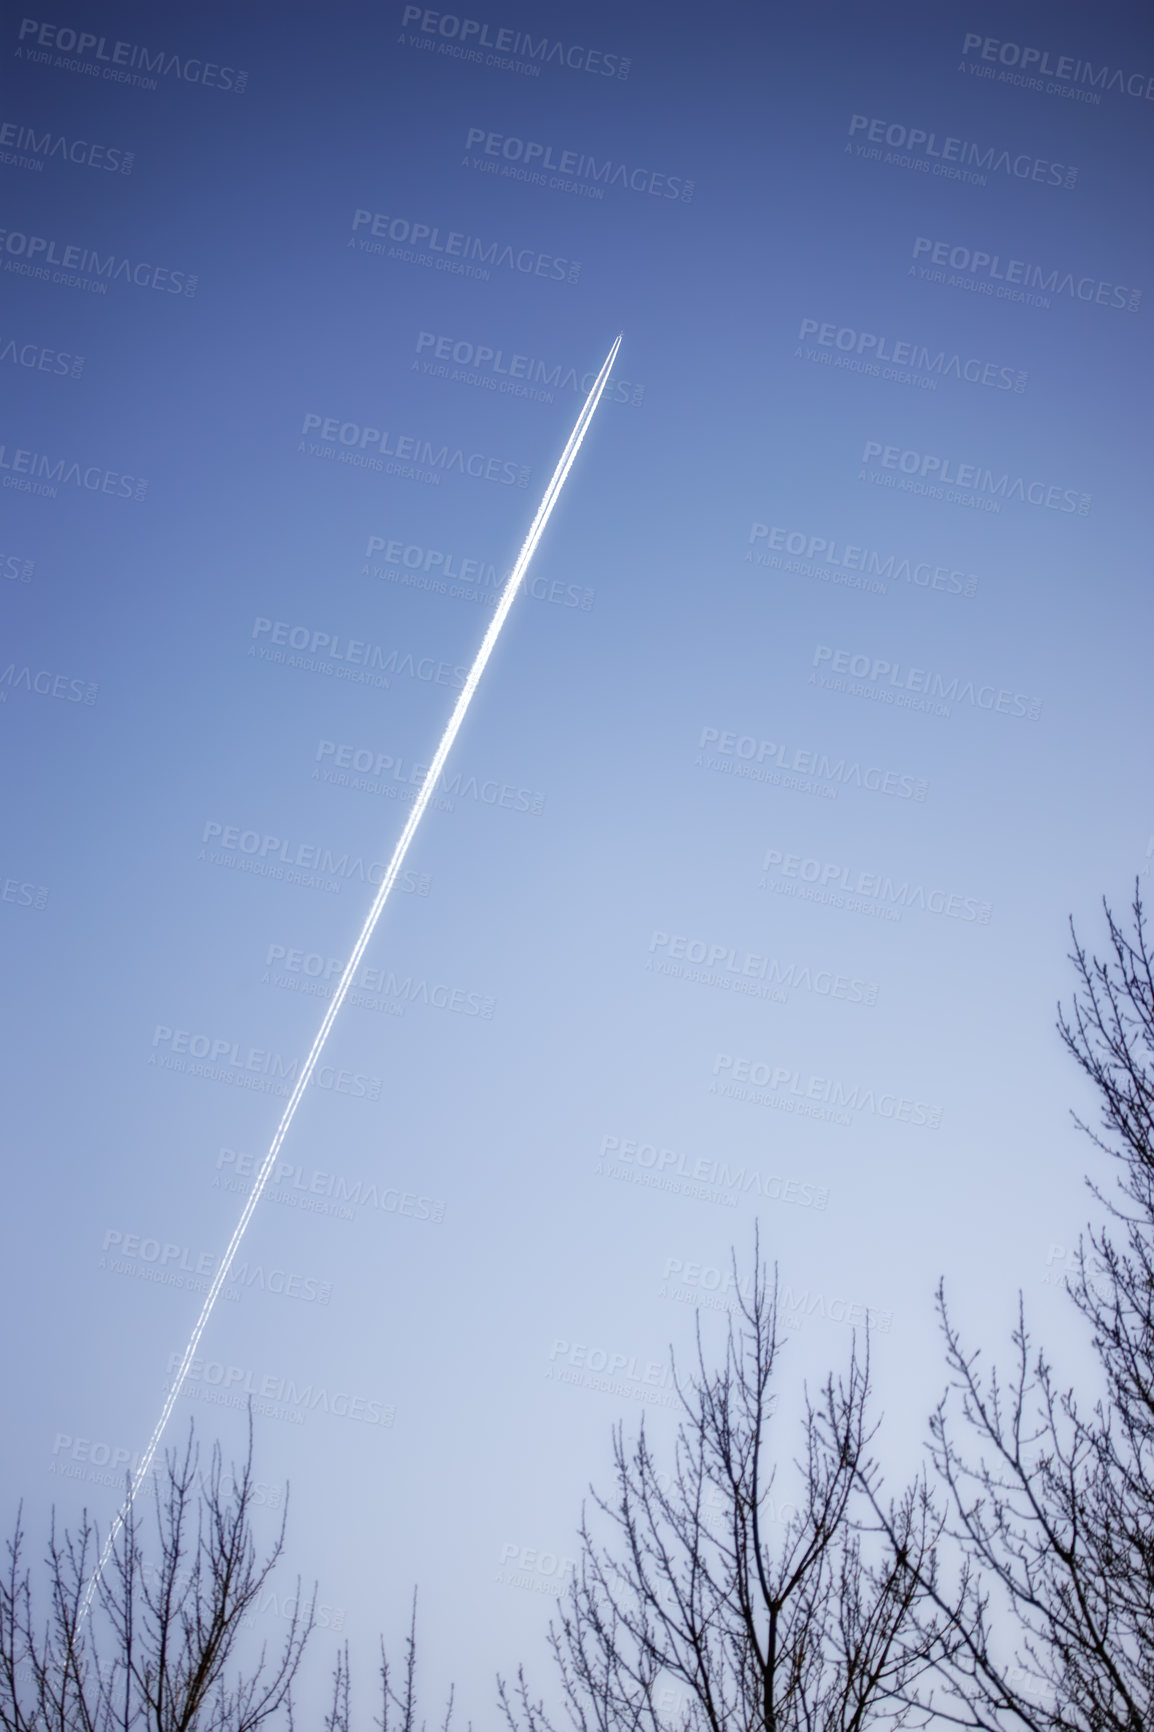 Buy stock photo Jet airplane contrail above leafless trees against a clear blue sky background with copyspace. View of a distant passenger plane flying at high altitude leaving a long white smoke trail behind